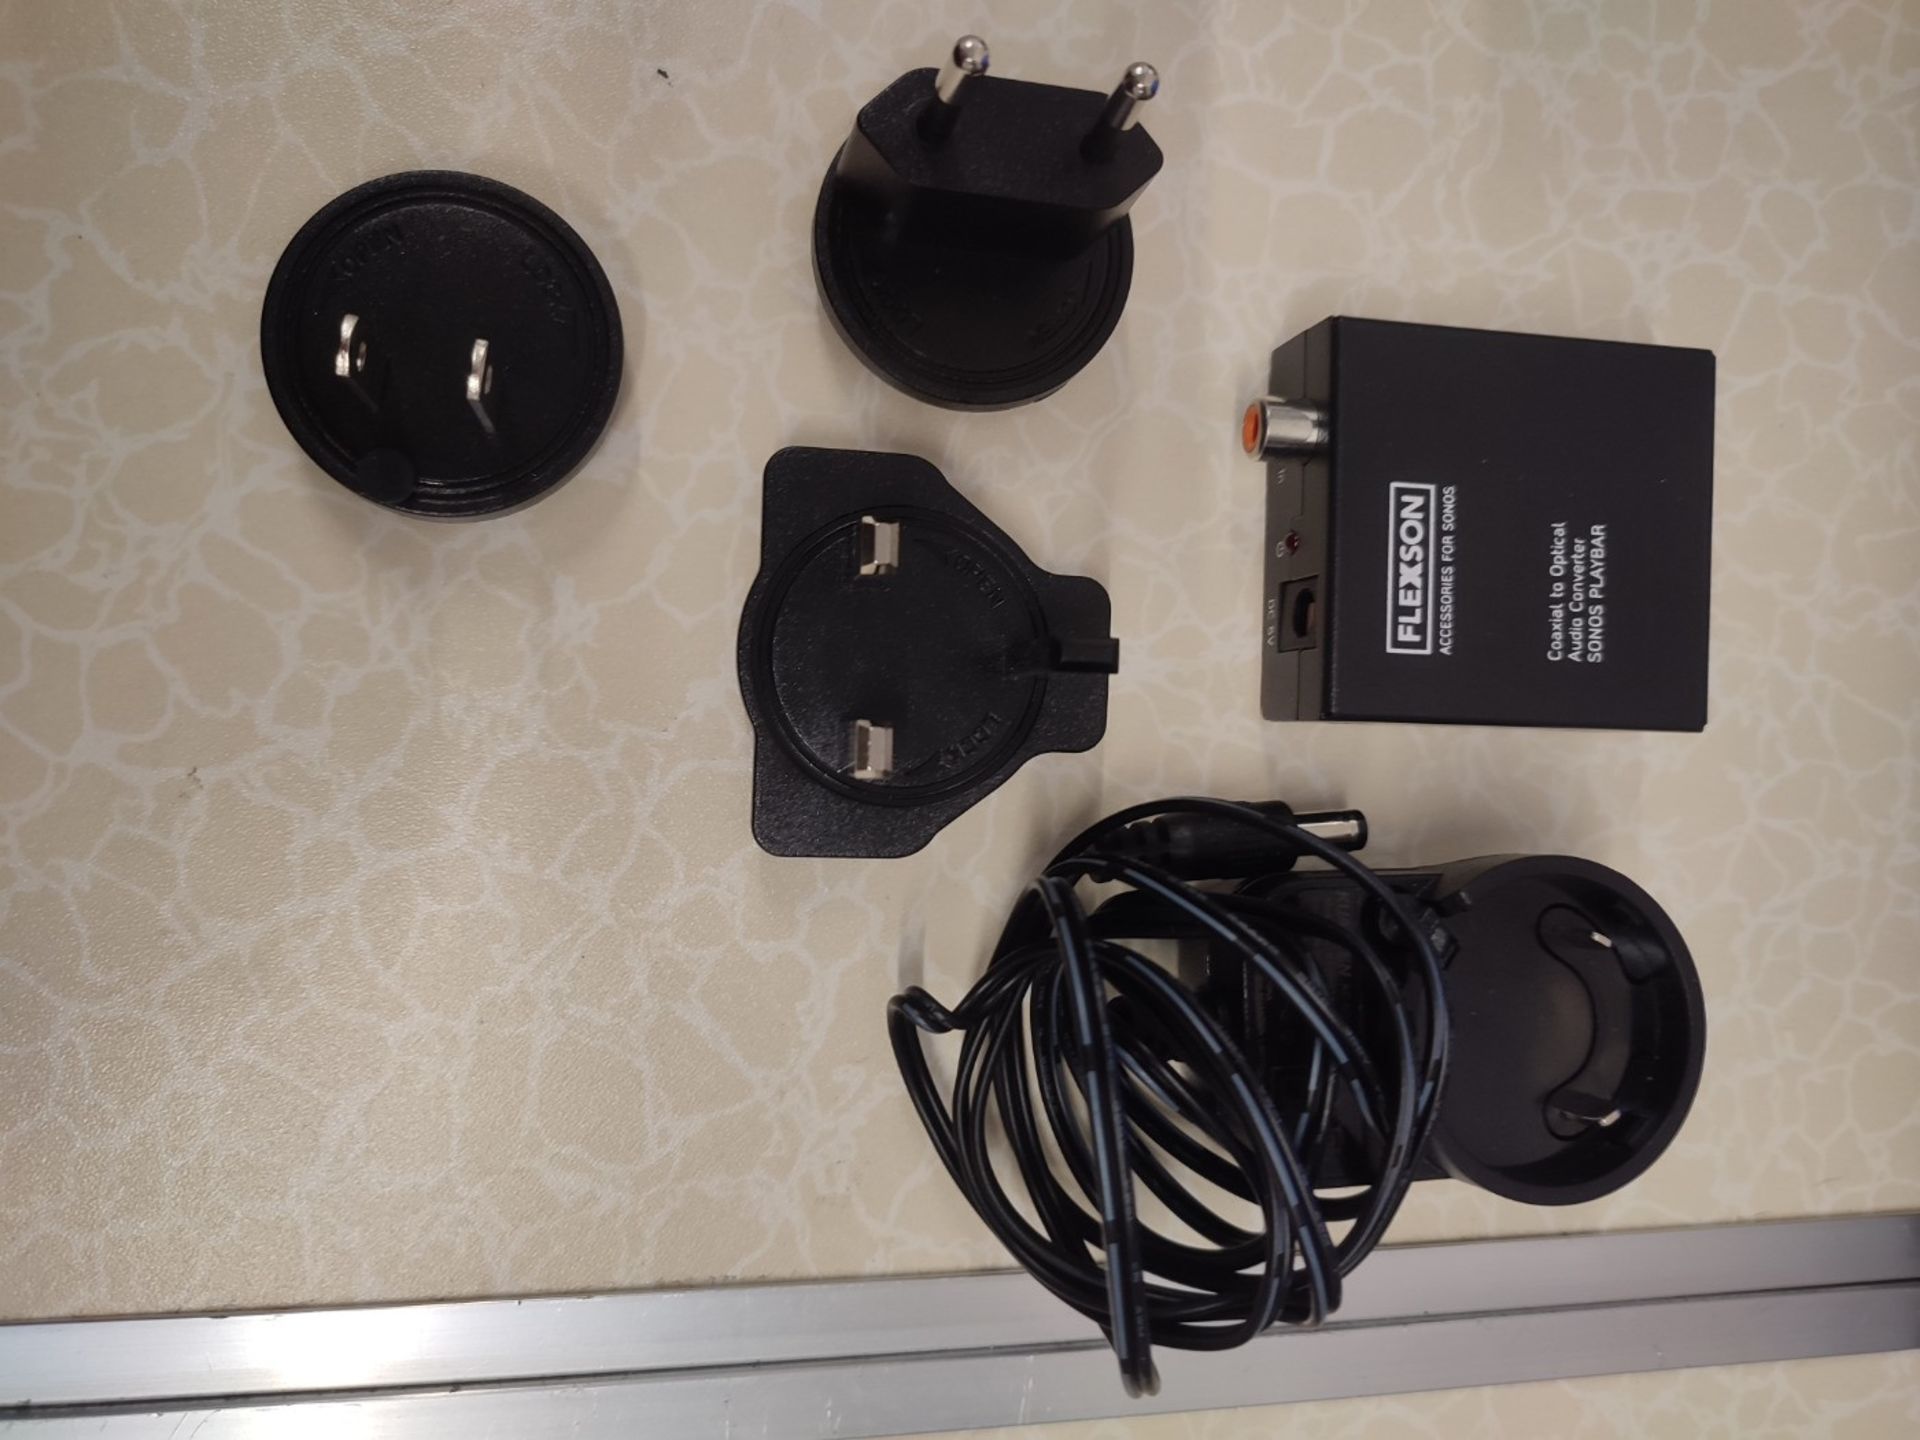 coaxial to optical audio converter for sonos - Image 2 of 2